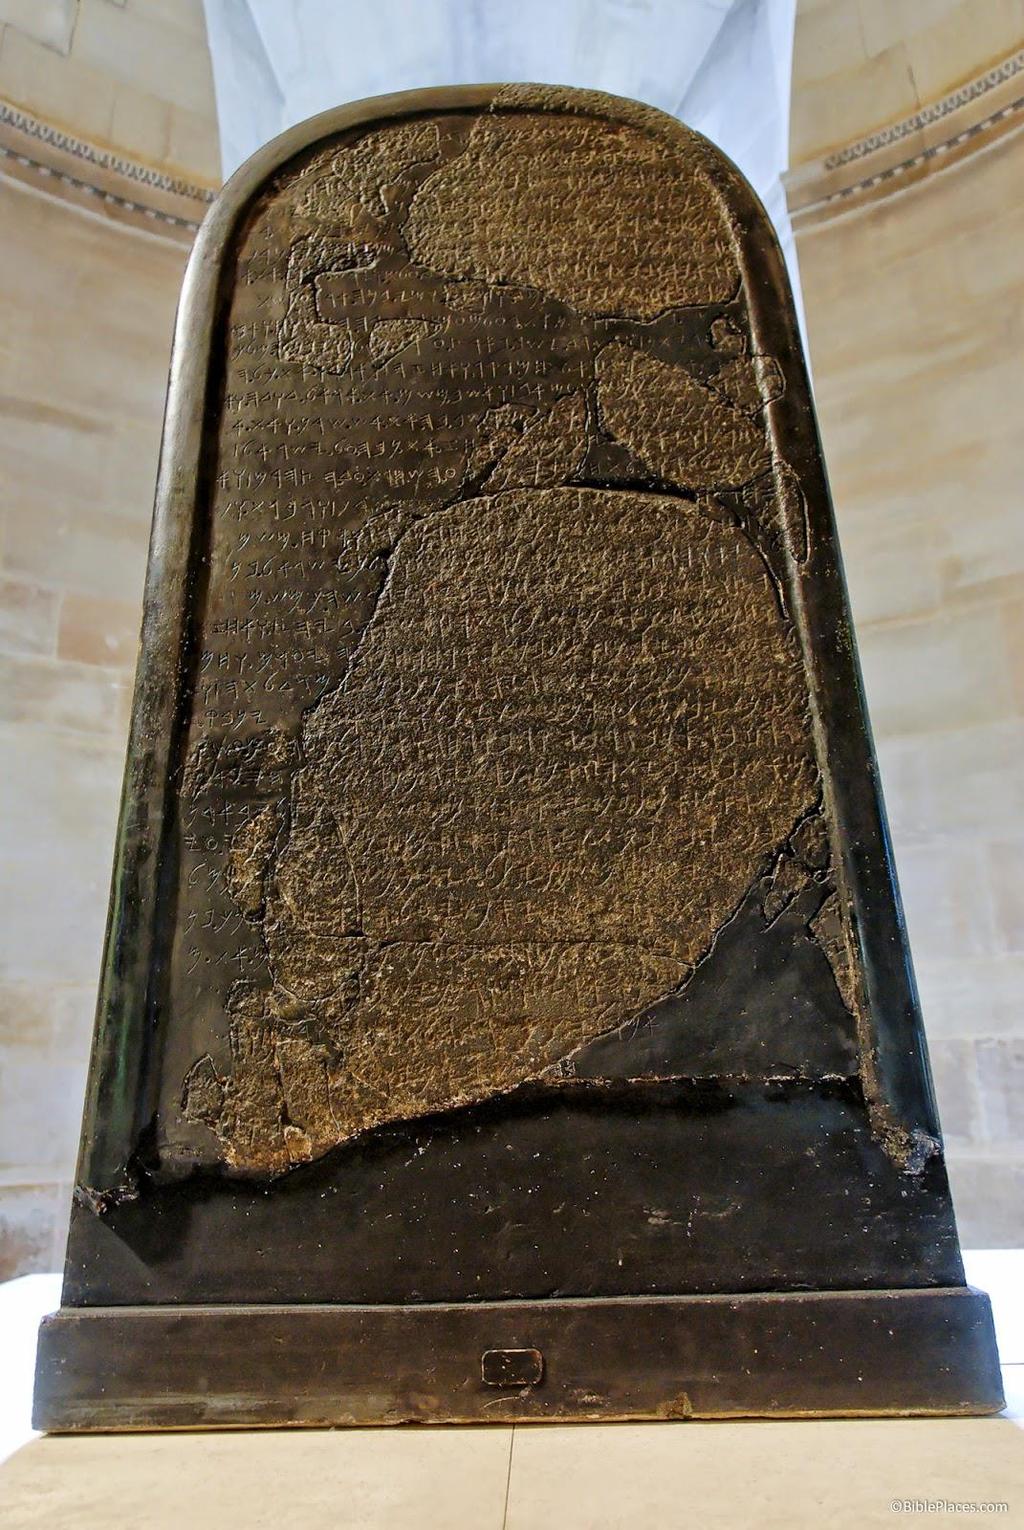 The Moabite Stone ca. 835 BC The Moabite Stone, also called the Mesha Stela, is an inscribed black basalt monument written in the Moabite language.